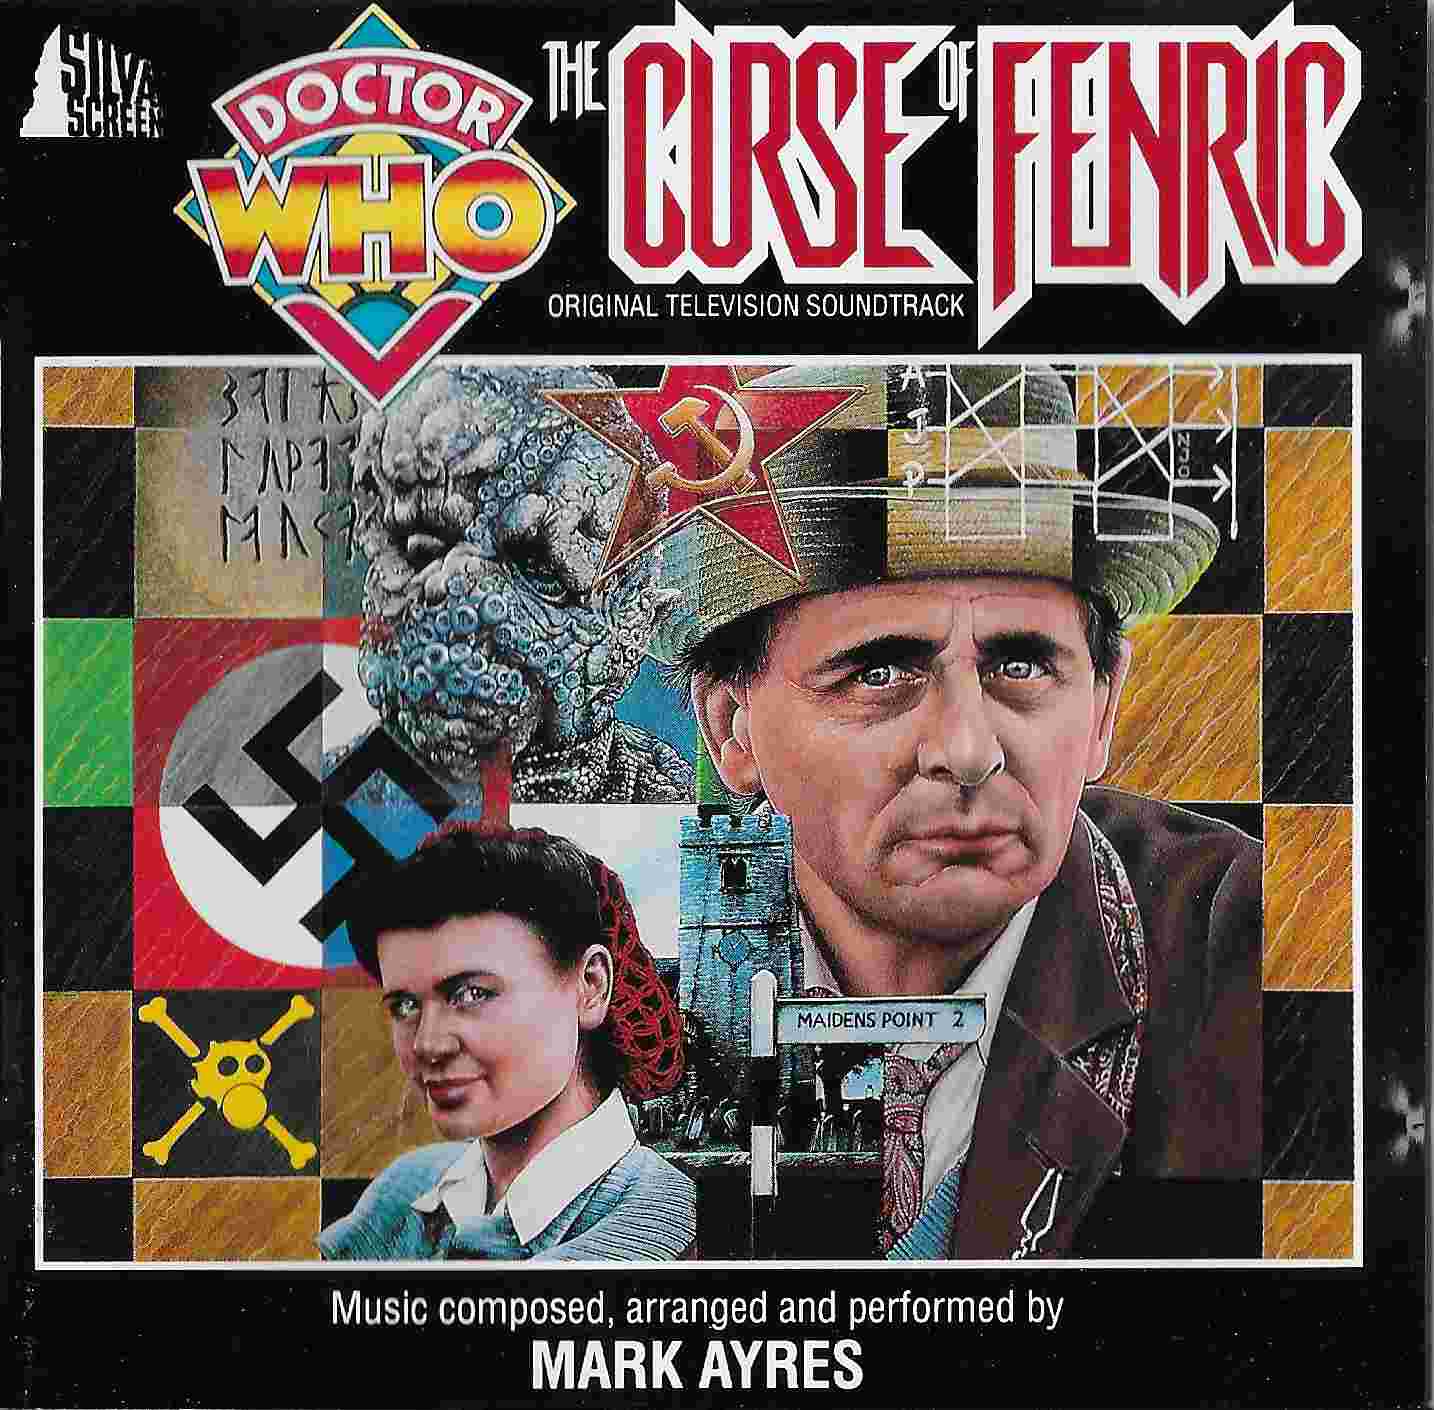 Picture of FILMCD 087 Doctor who - The curse of Fenric by artist Mark Ayres from the BBC records and Tapes library